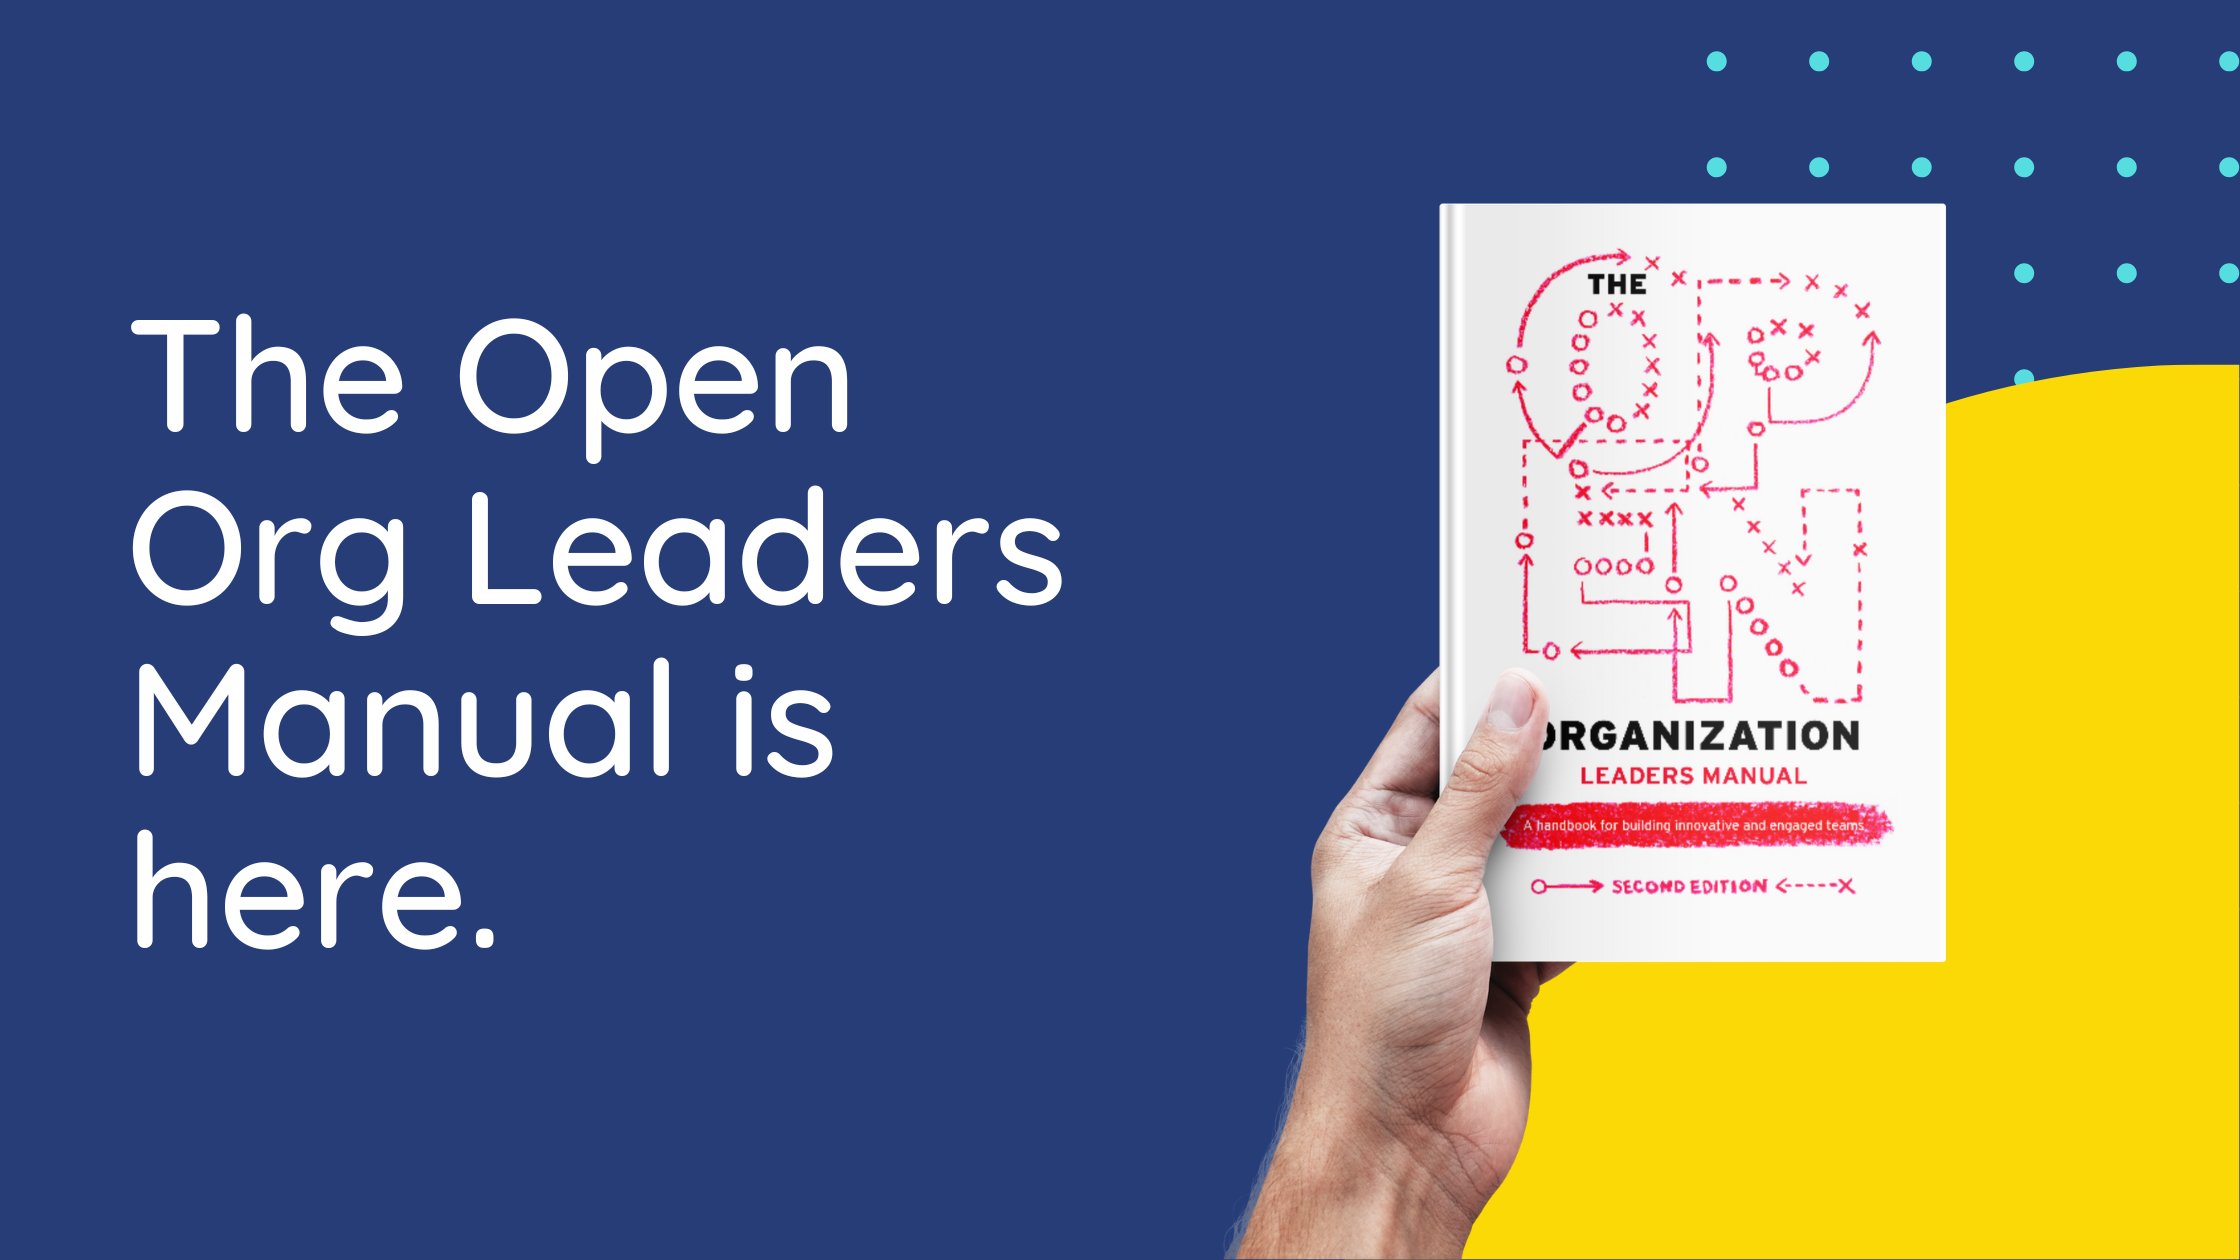 New Release: The Open Organization Leaders Manual (second edition)